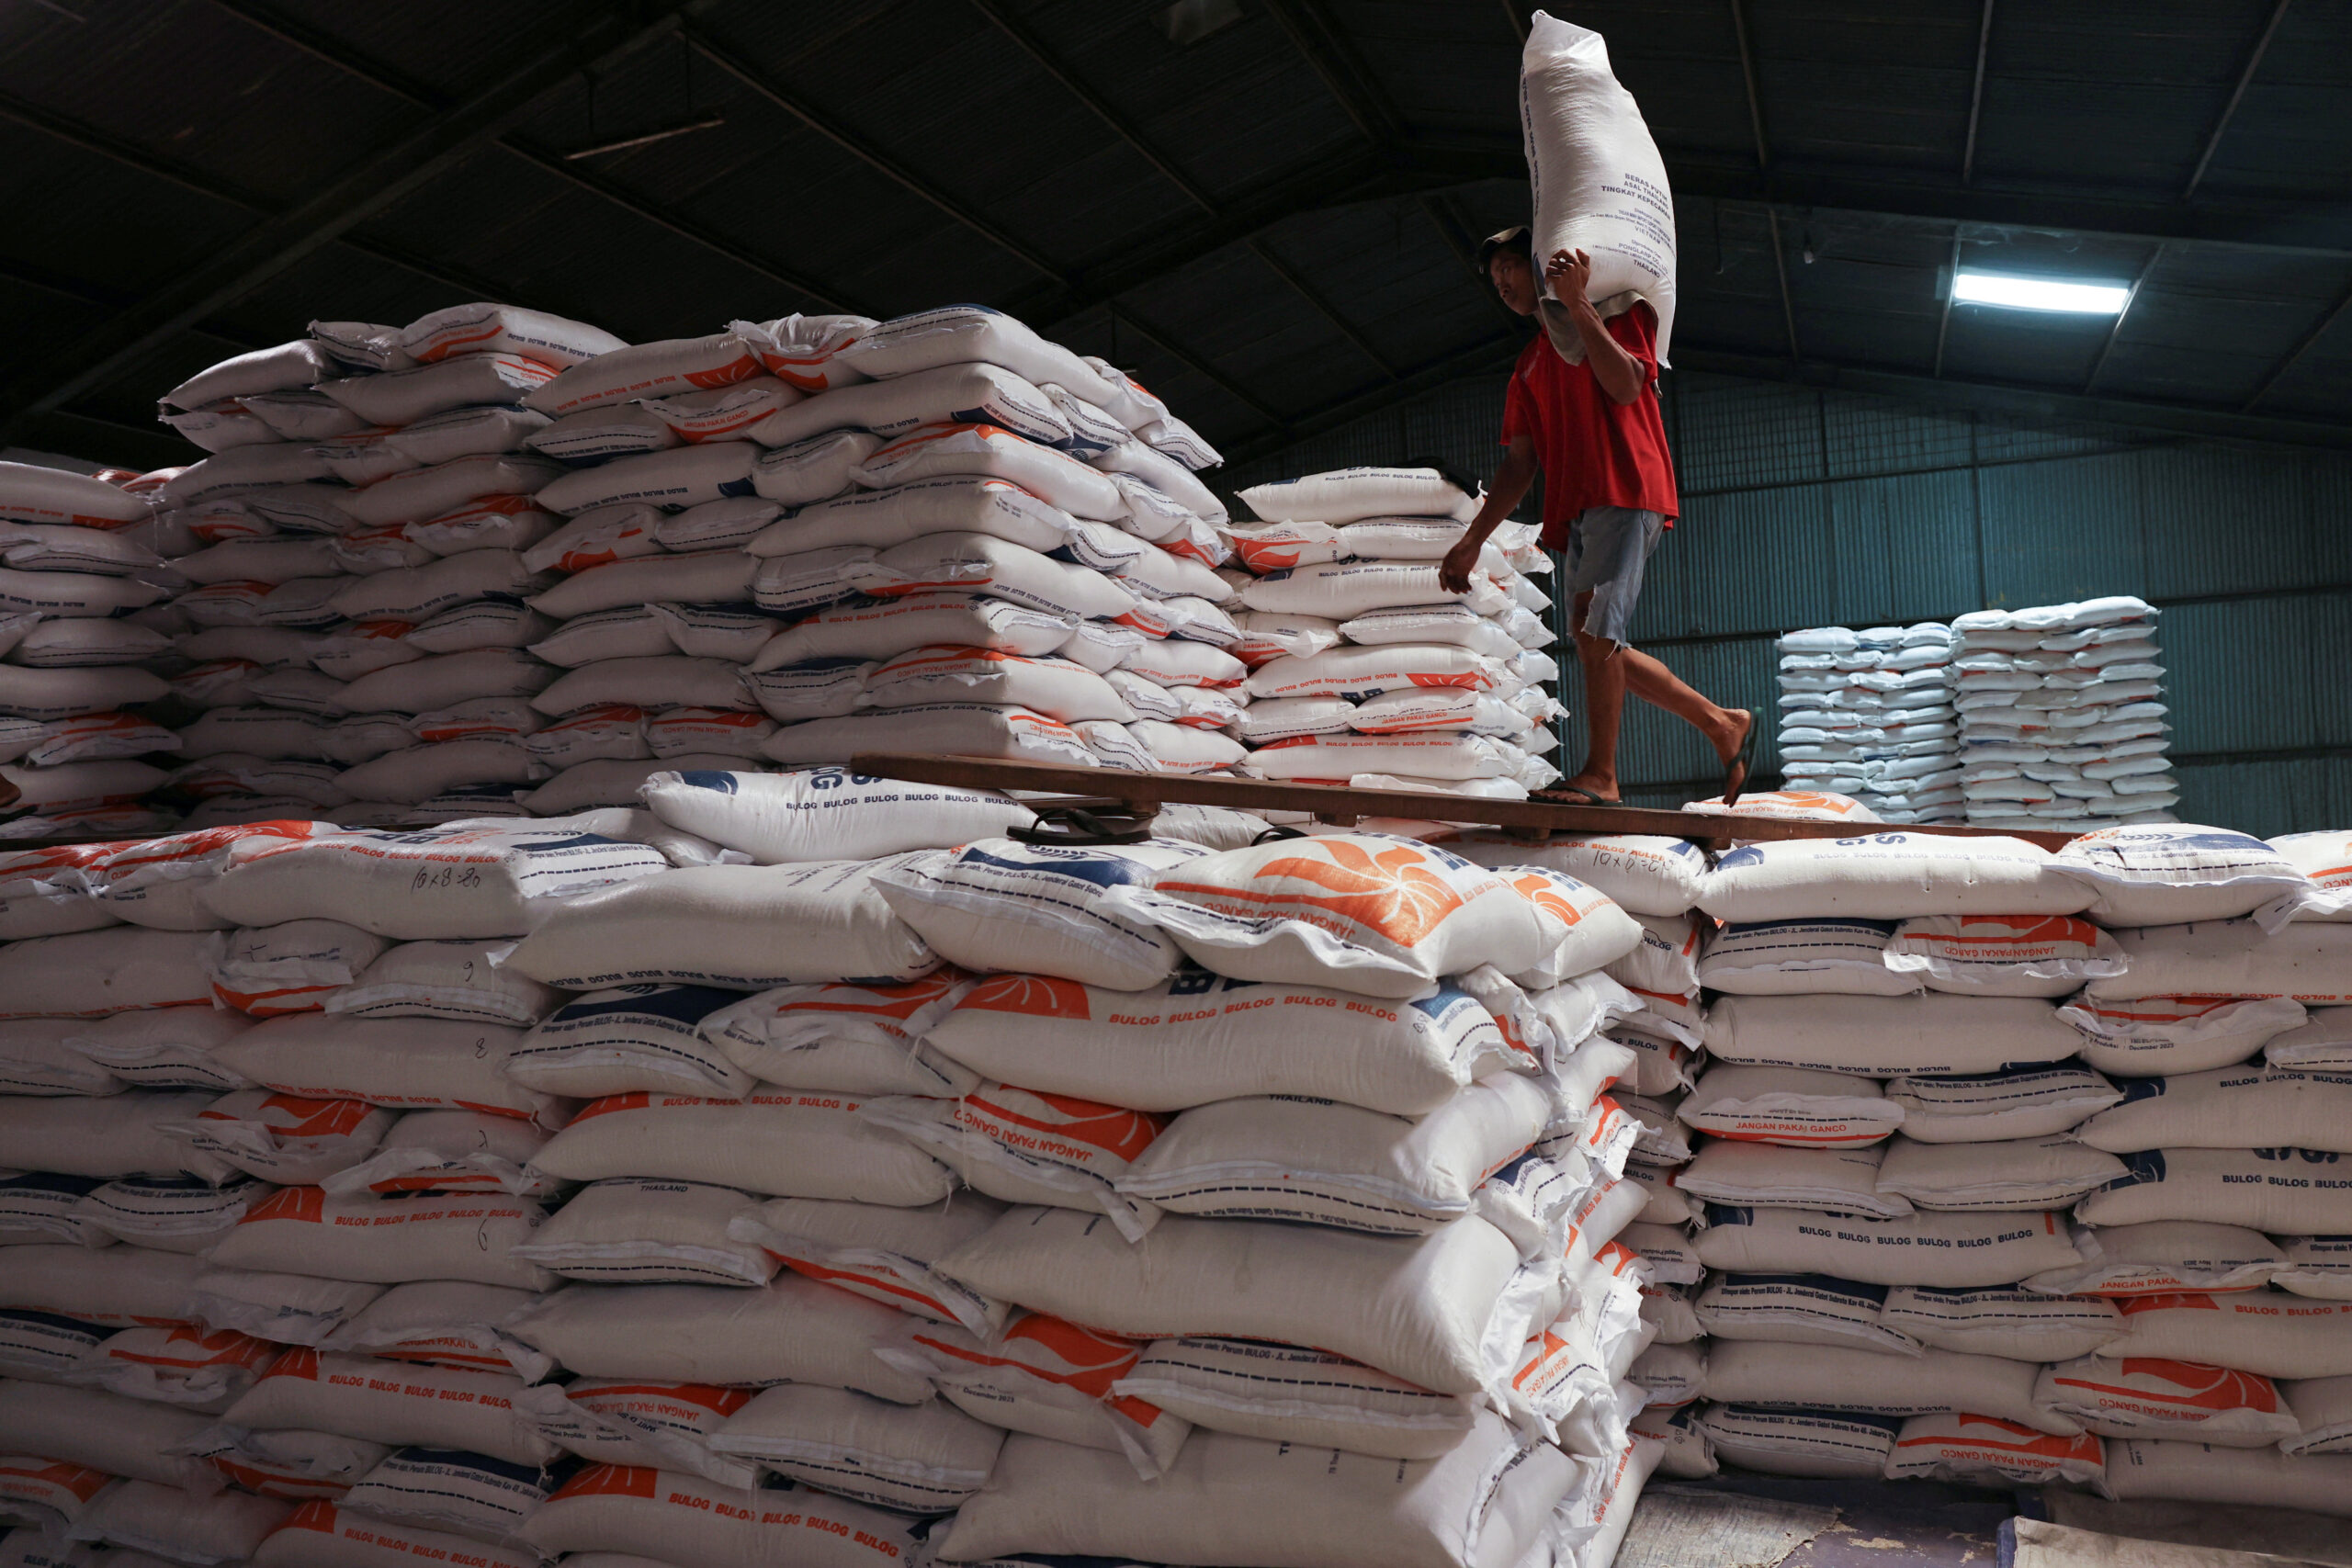 Long lines for subsidized rice highlight plight of Indonesia's poor